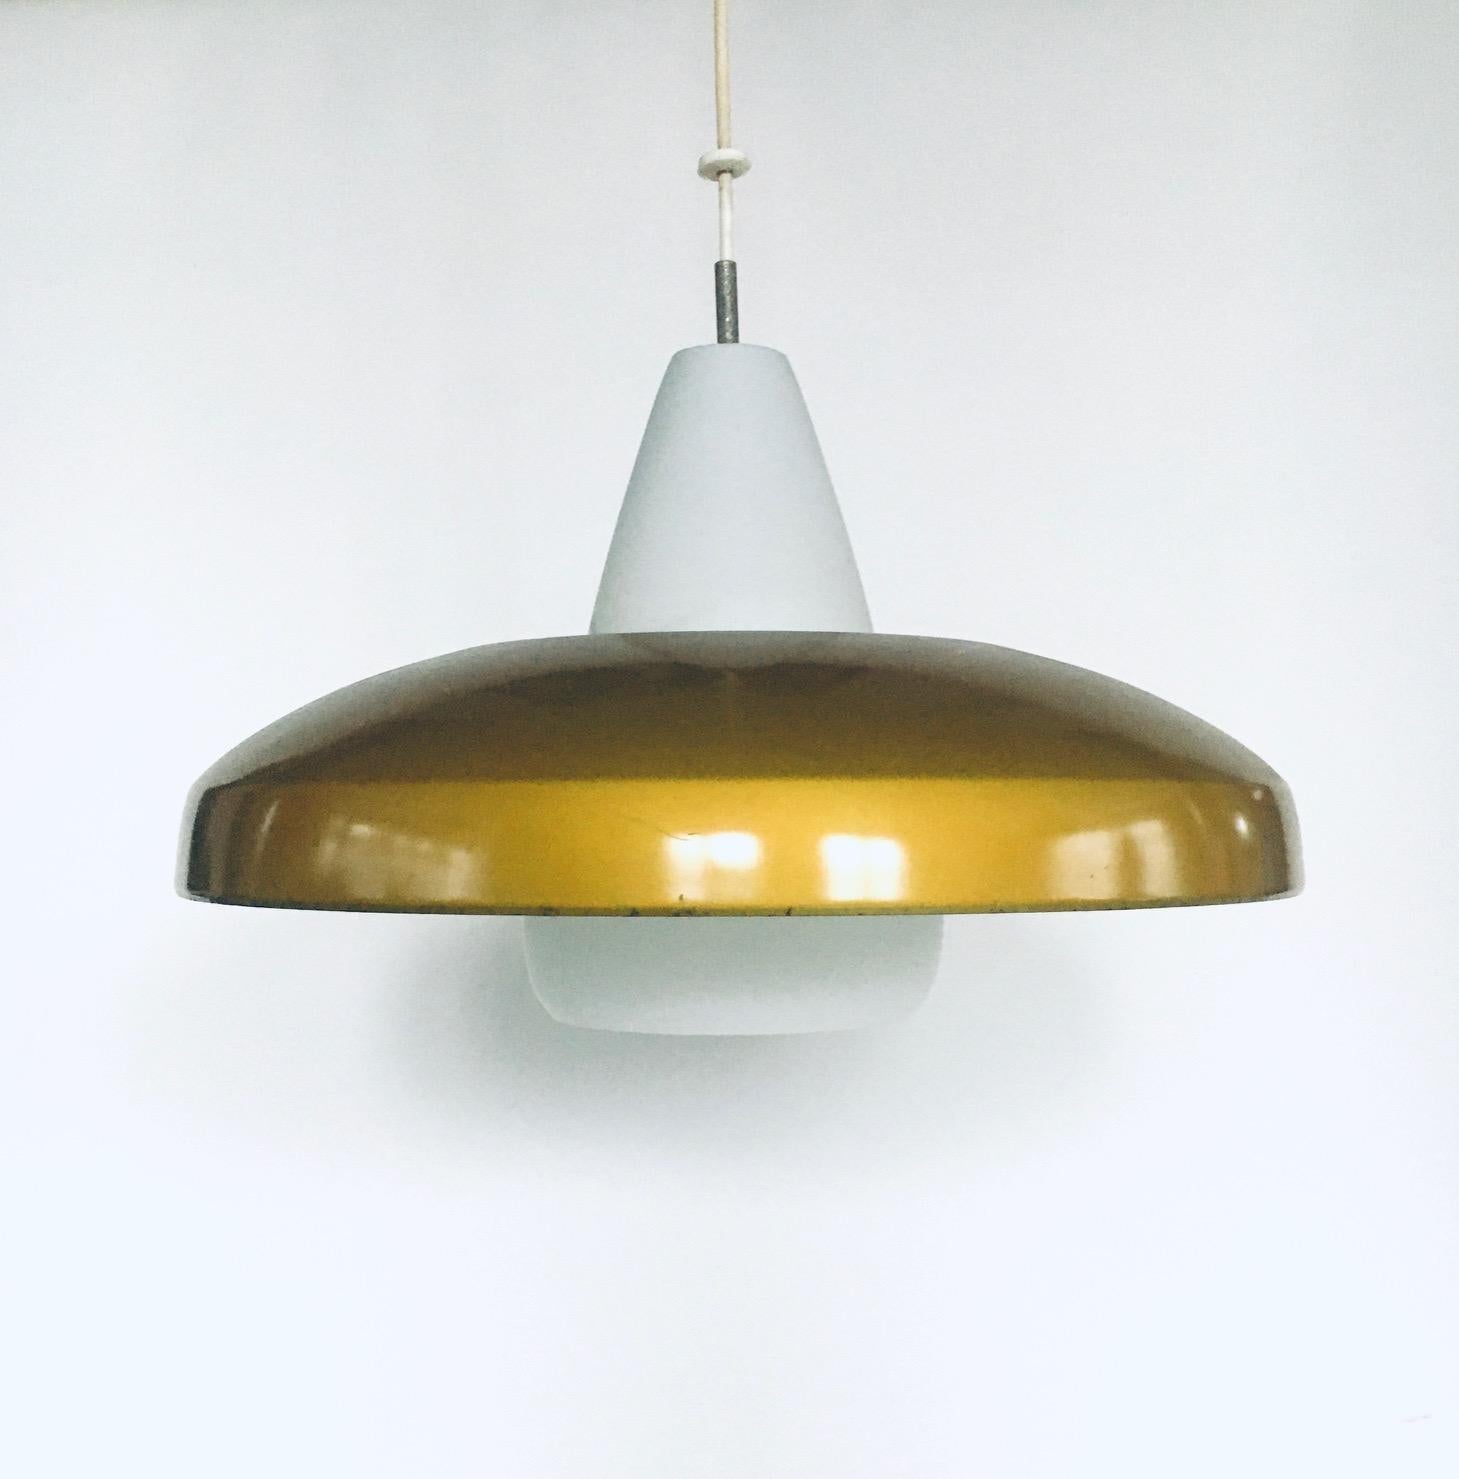 Vintage Mid-Century Modern Dutch design pendant lamp by Philips, made in the Netherlands, 1950s. Gold metal shade with white inner on opaline milk glass pendant. All original hanging system. In very good condition, some minor chipping on the top